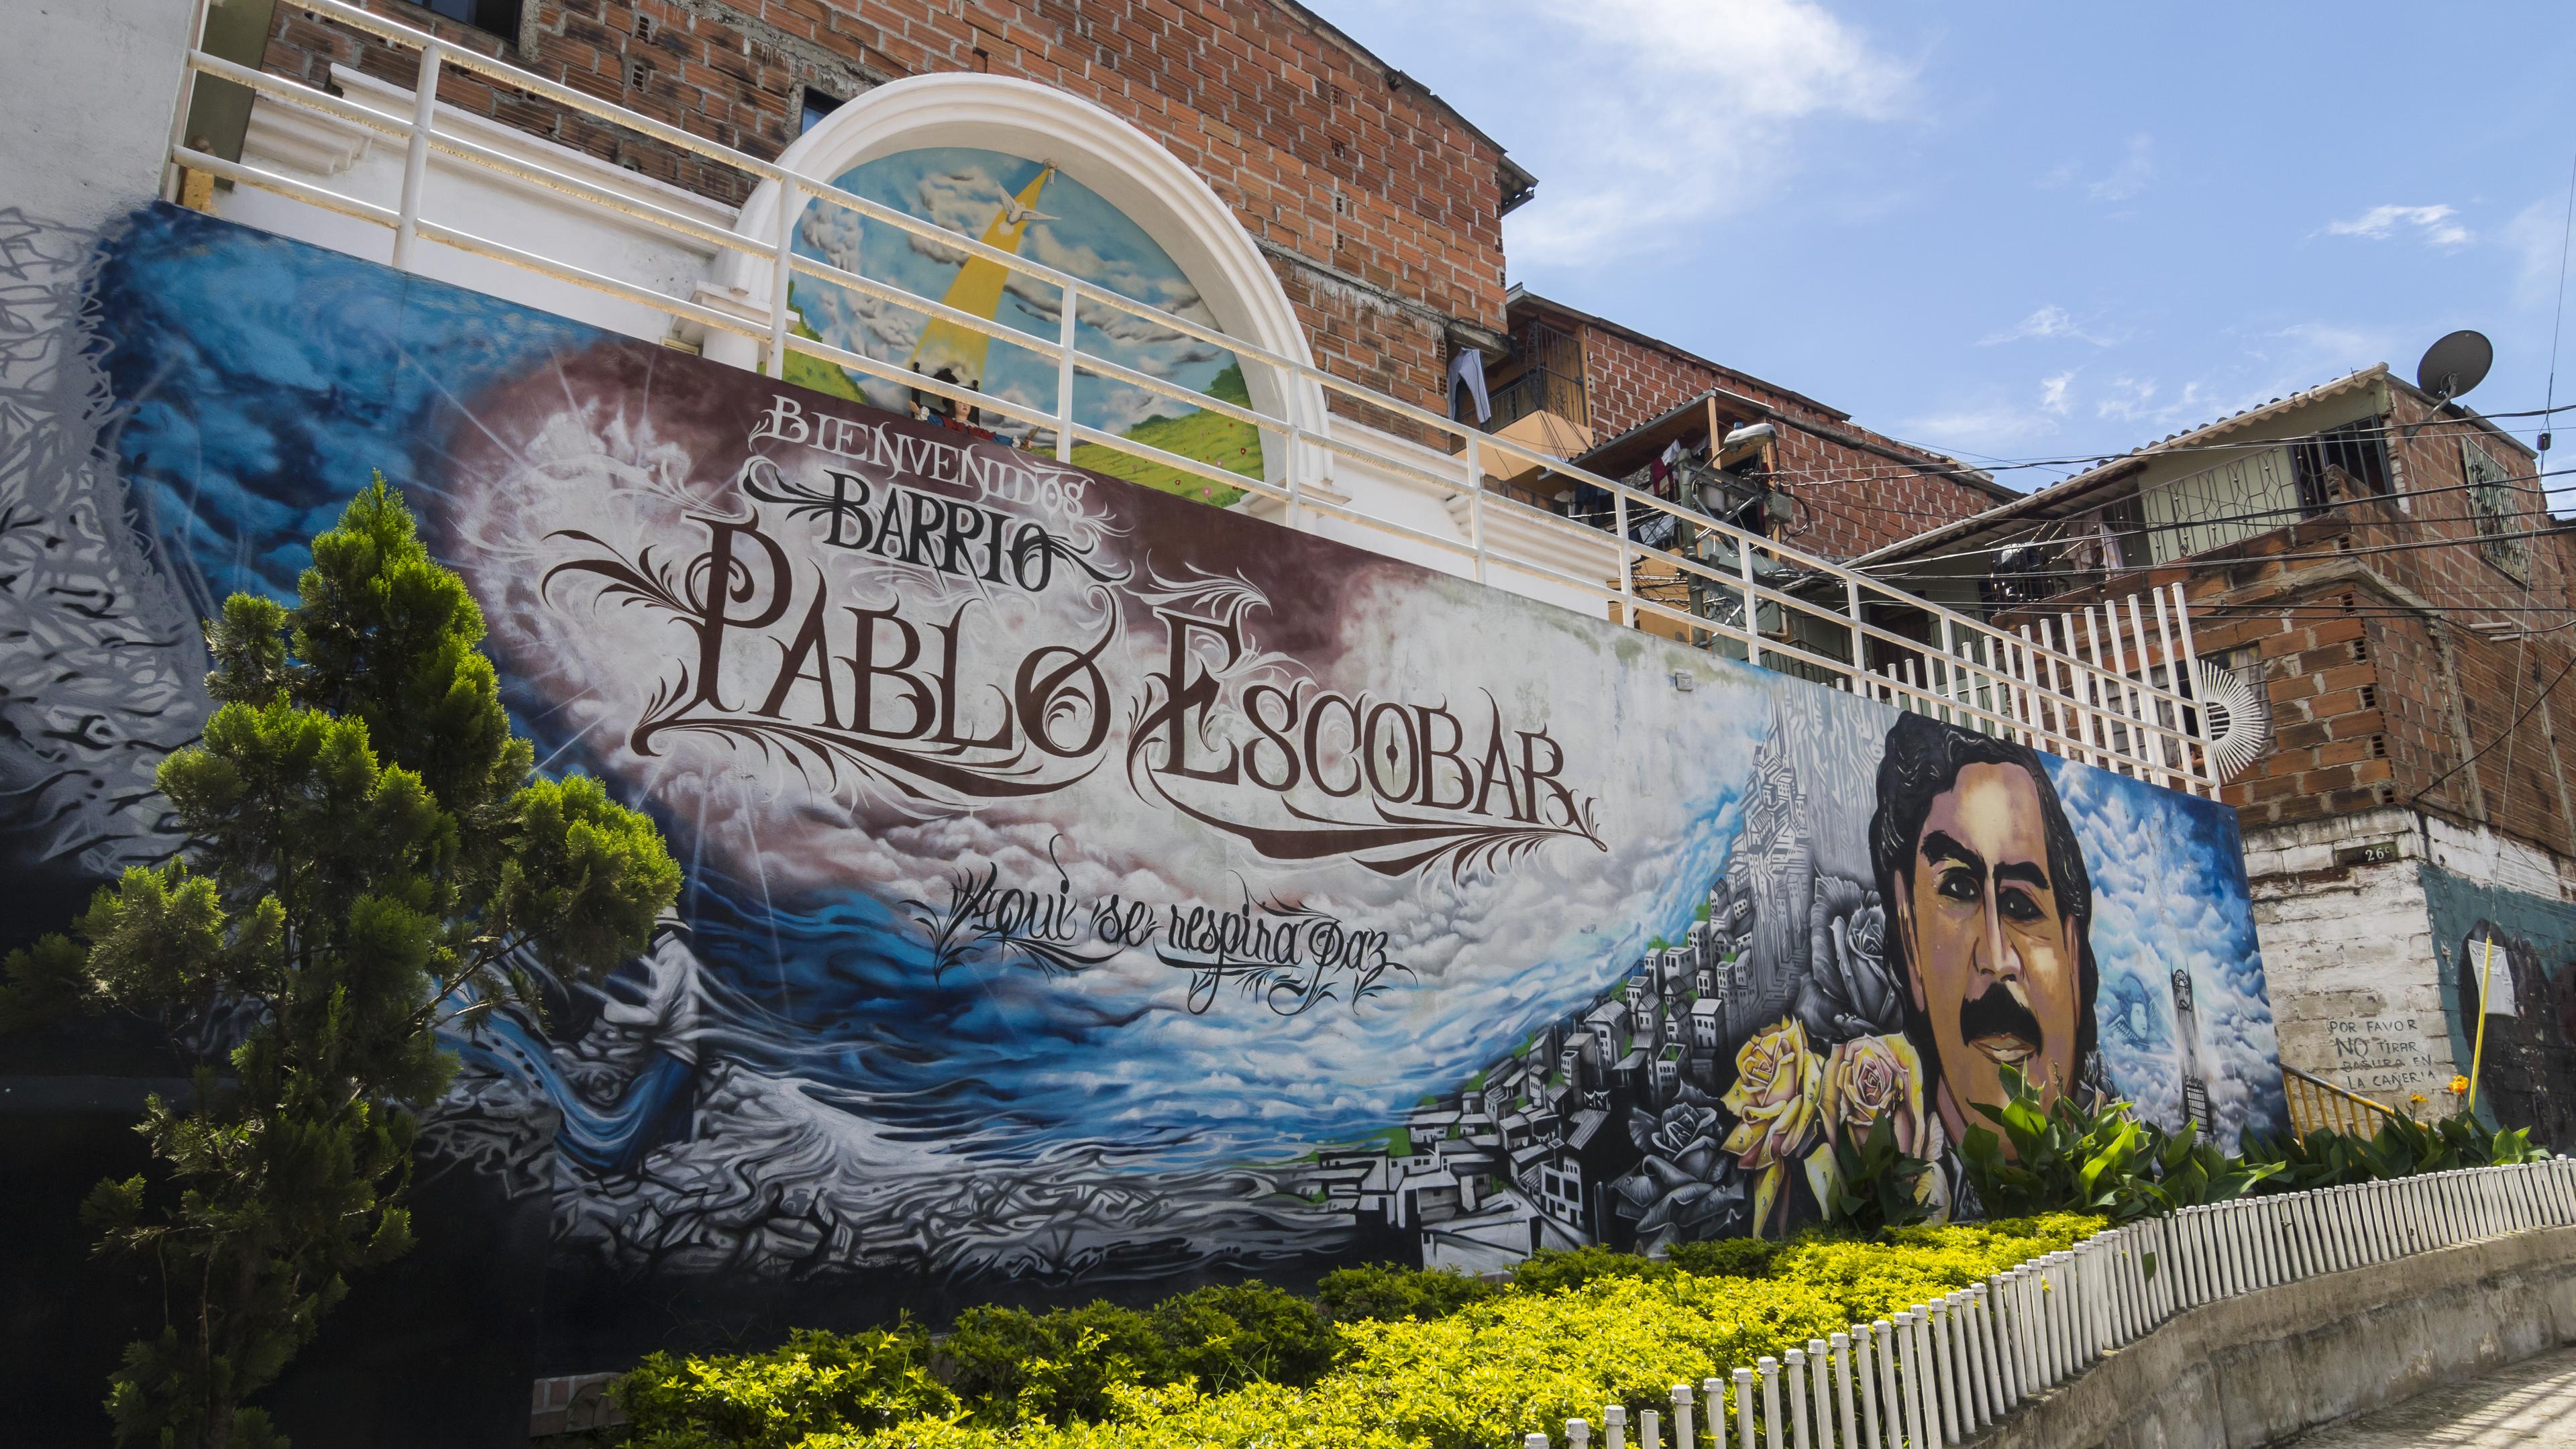 Mural at the entrance to the “Pablo Escobar District” in Colombia, Medellín, 21 November 2018.